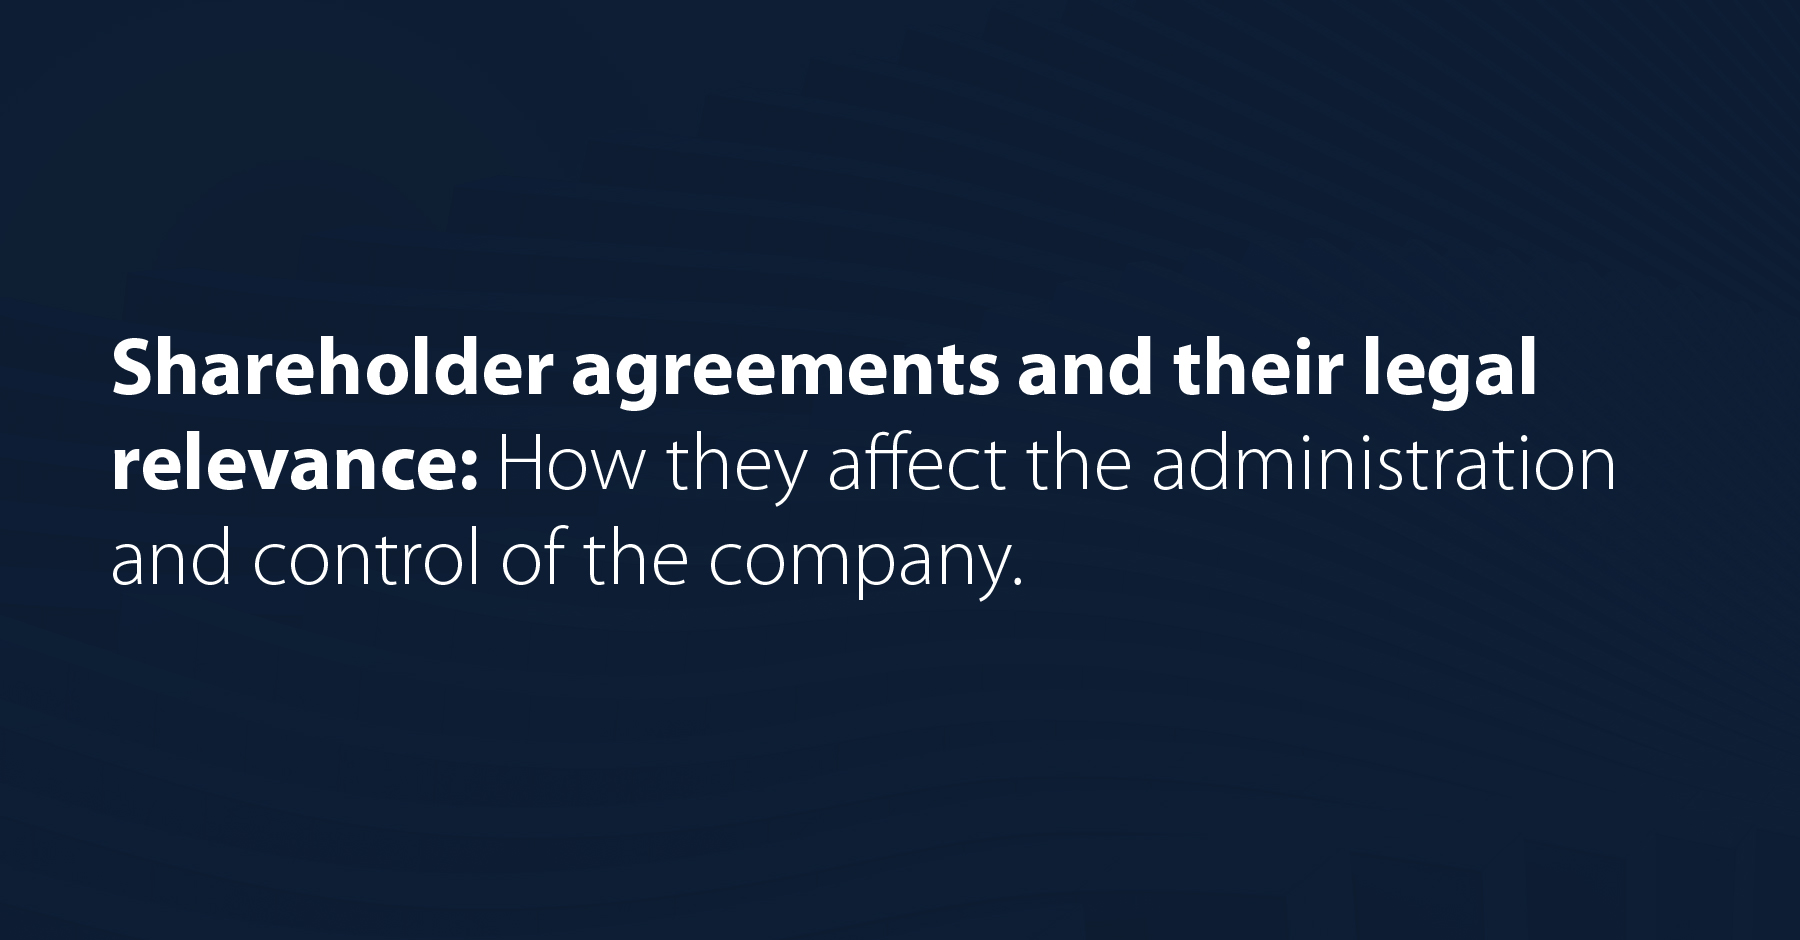 Shareholder agreements and their legal relevance: How they affect the administration and control of the company